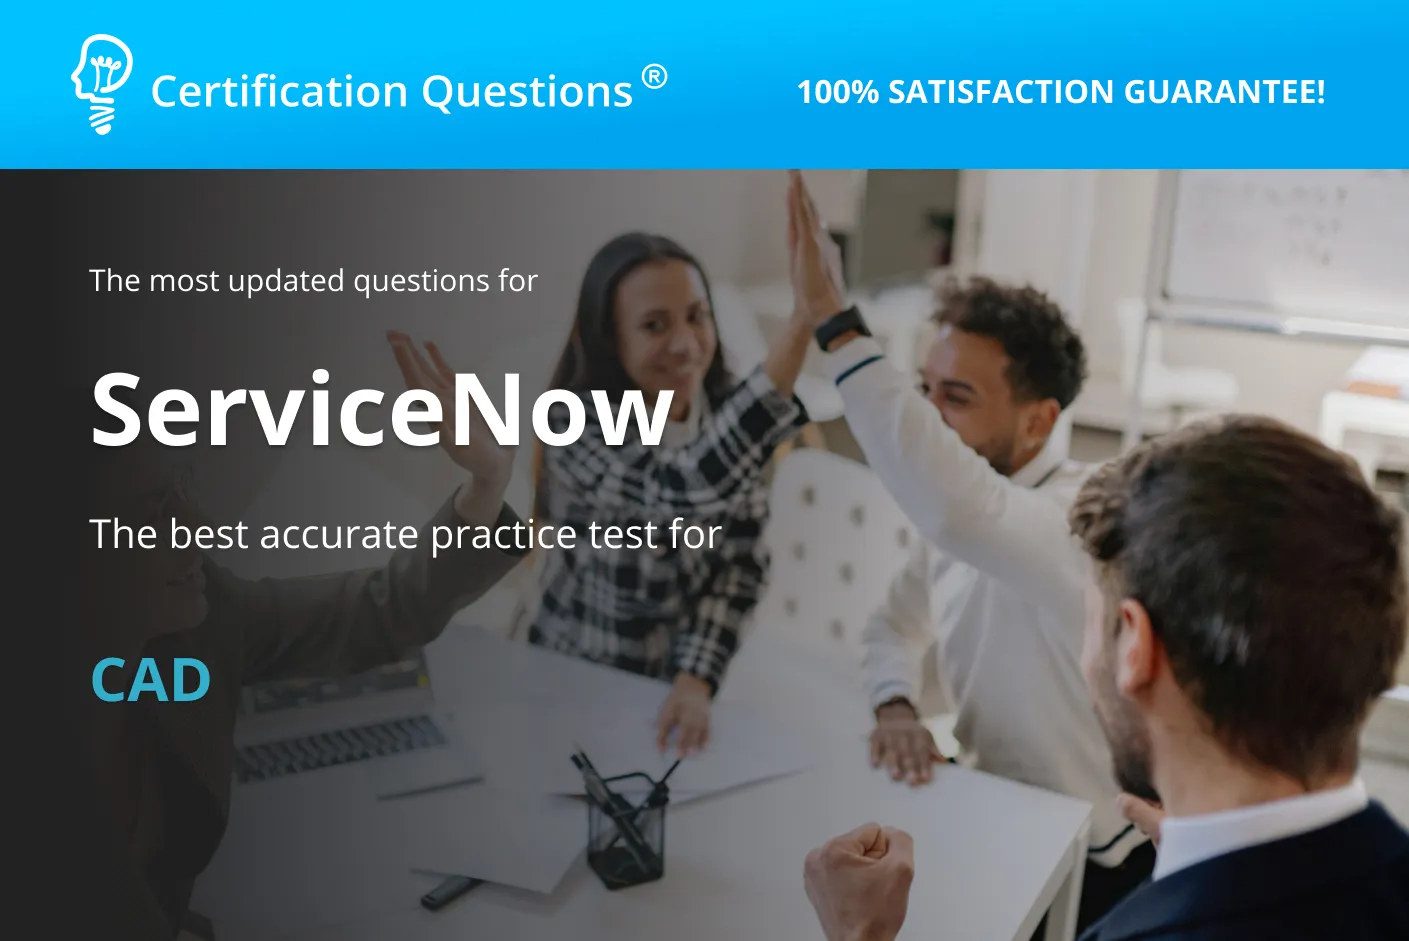 This image is related to servicenow cad practice test